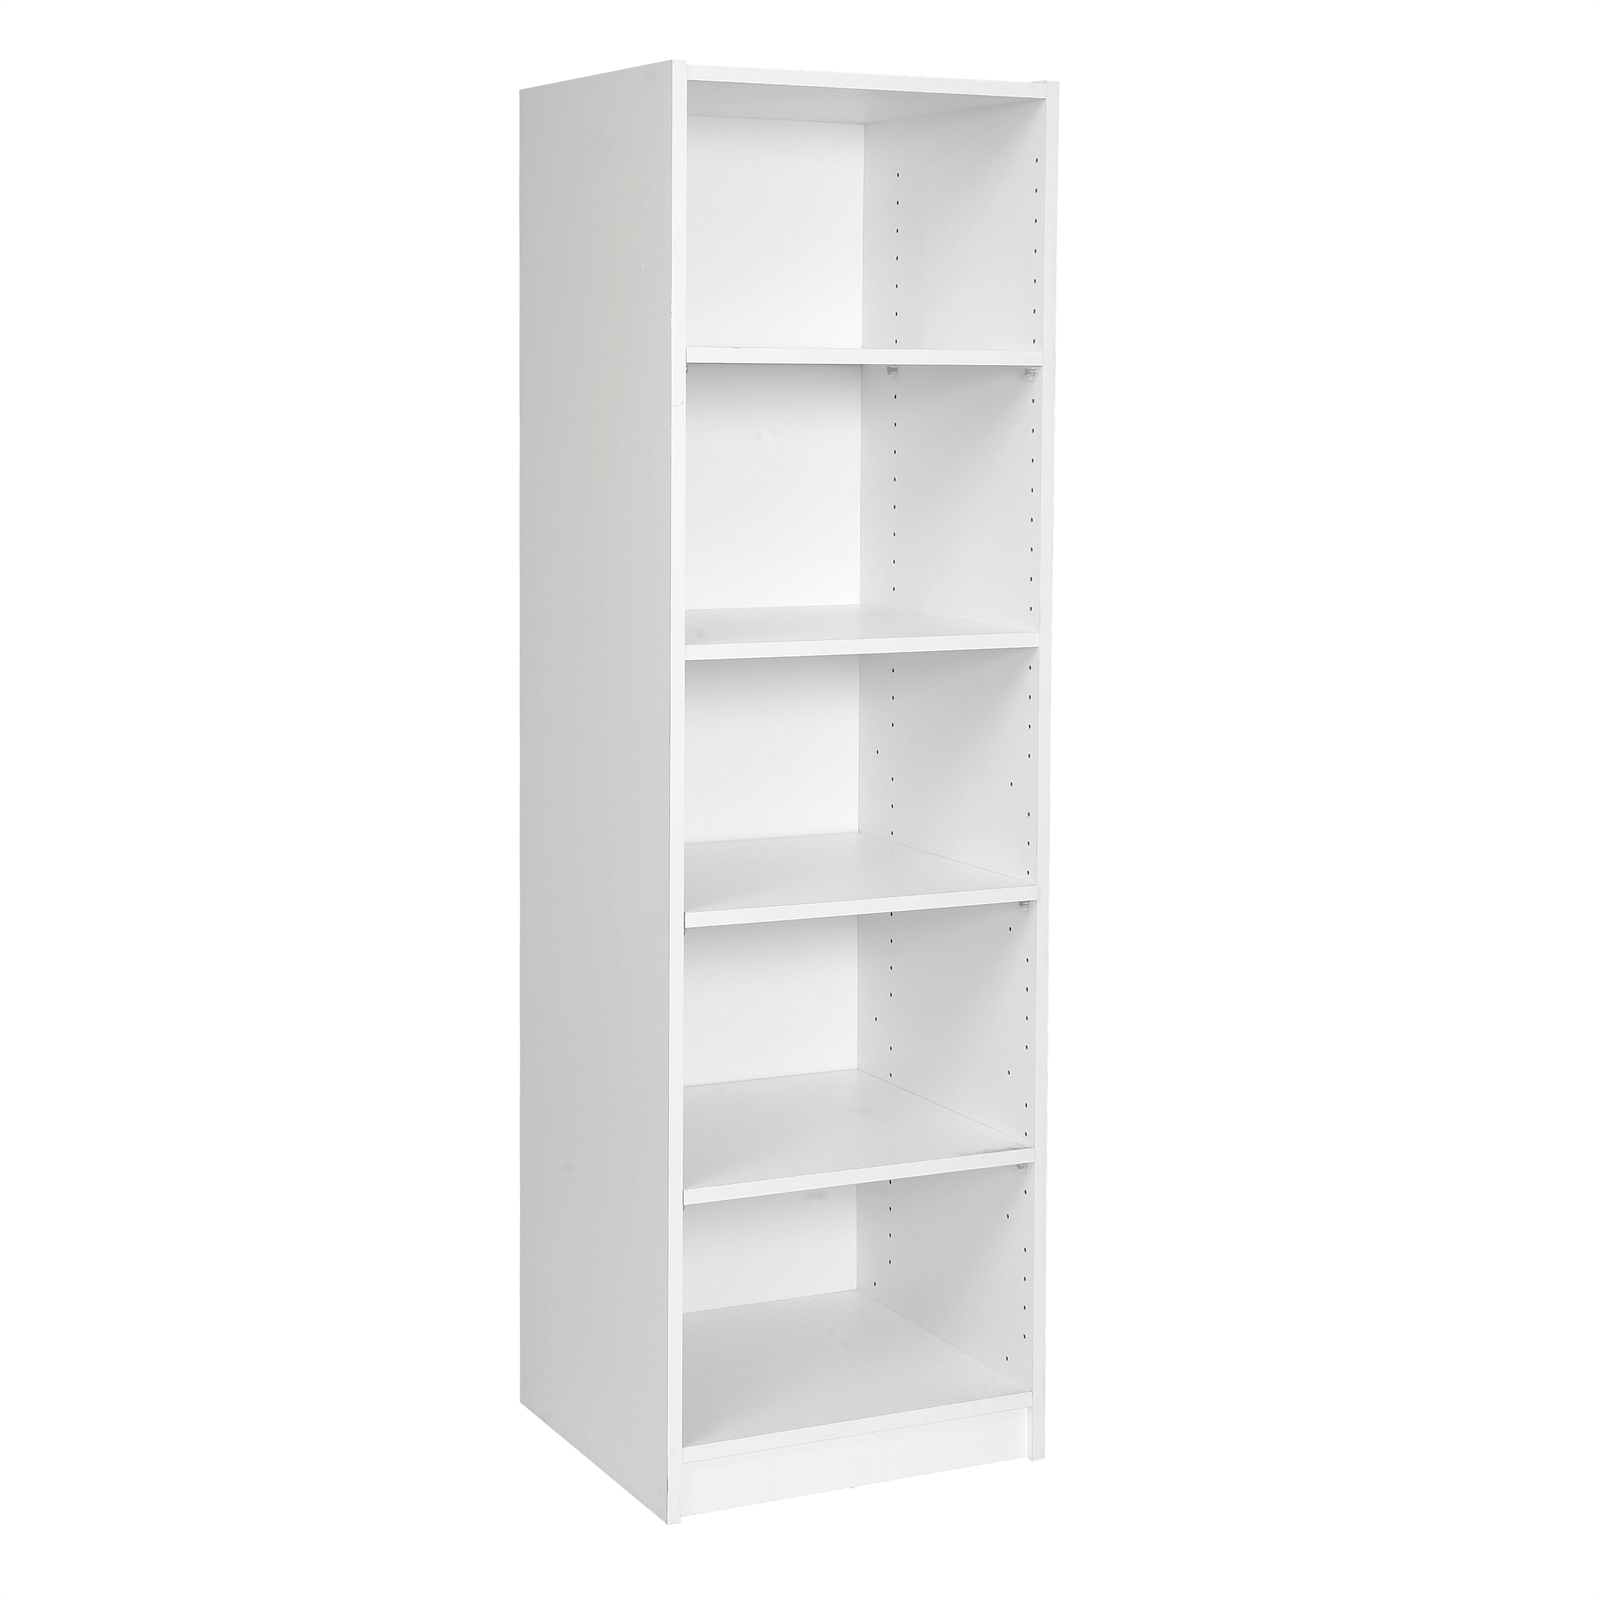 Multistore 1495 x 450 x 430mm White Wardrobe Insert with 1 Fixed Shelf and 3 Adjustable Shelves